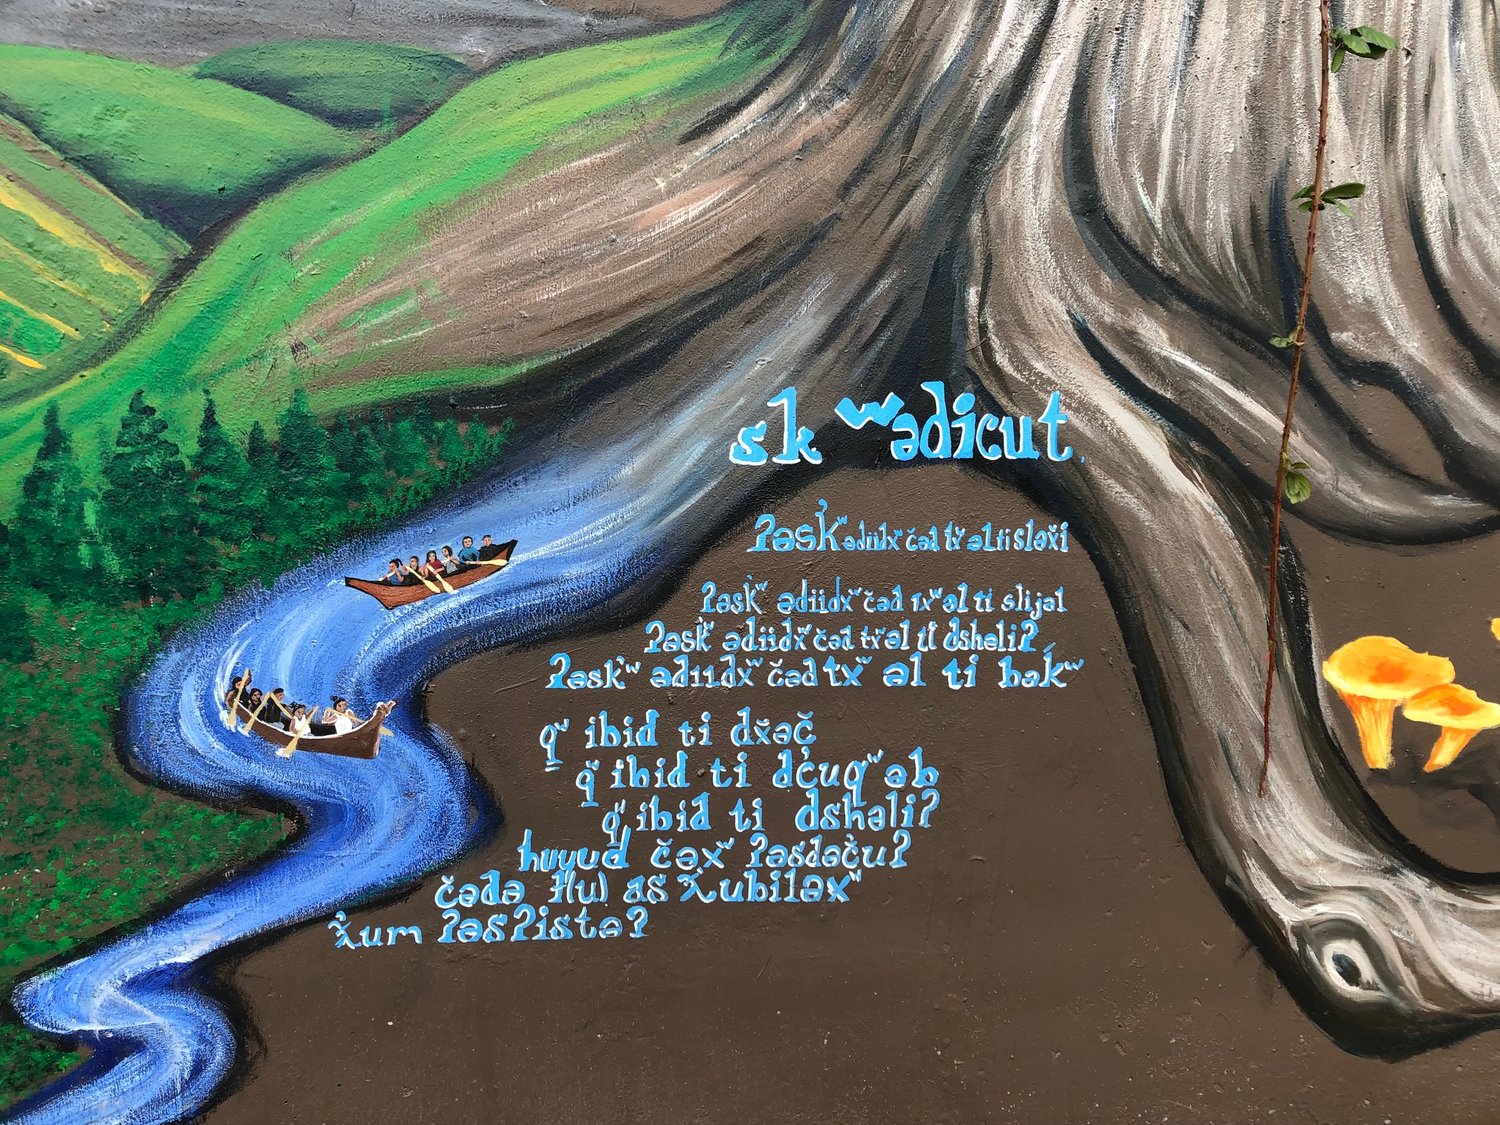 This Native American prayer is painted in a dialect of the Lushootseed language on the Climate Justice Wall in west Olympia. See translation in the next photo.